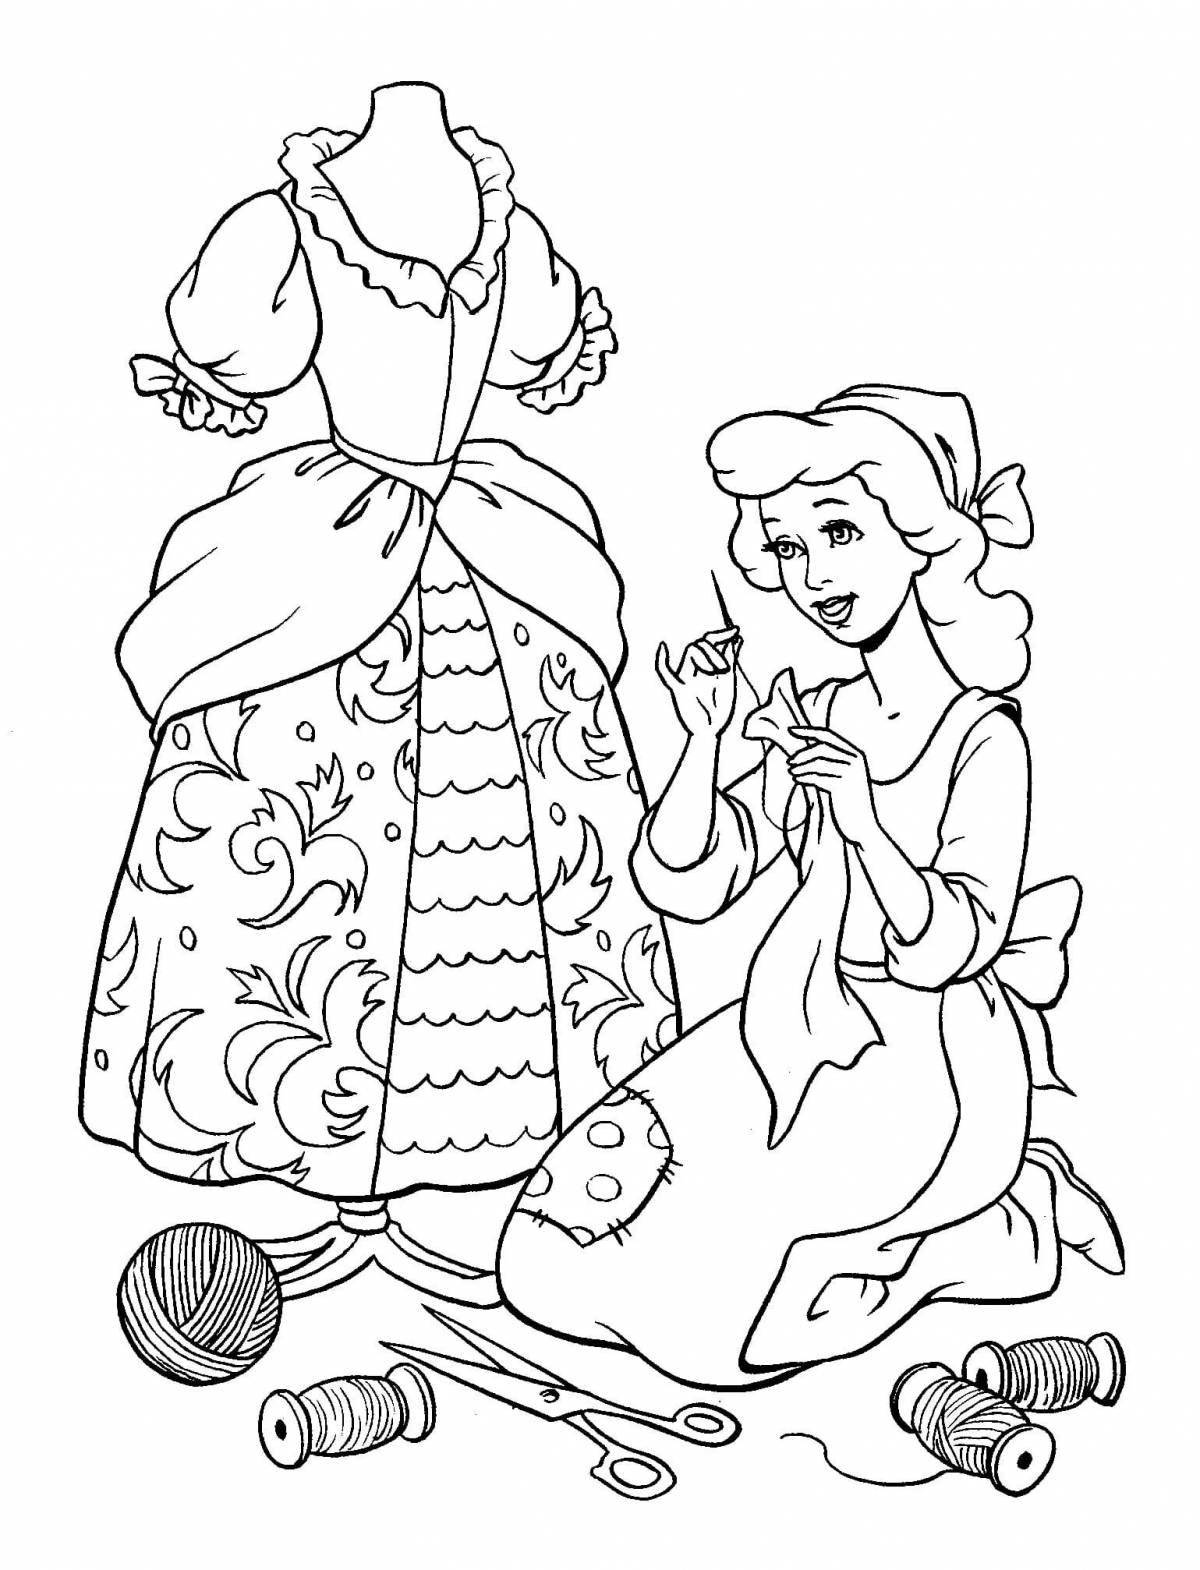 Exquisite Cinderella and Charles Perrault coloring book